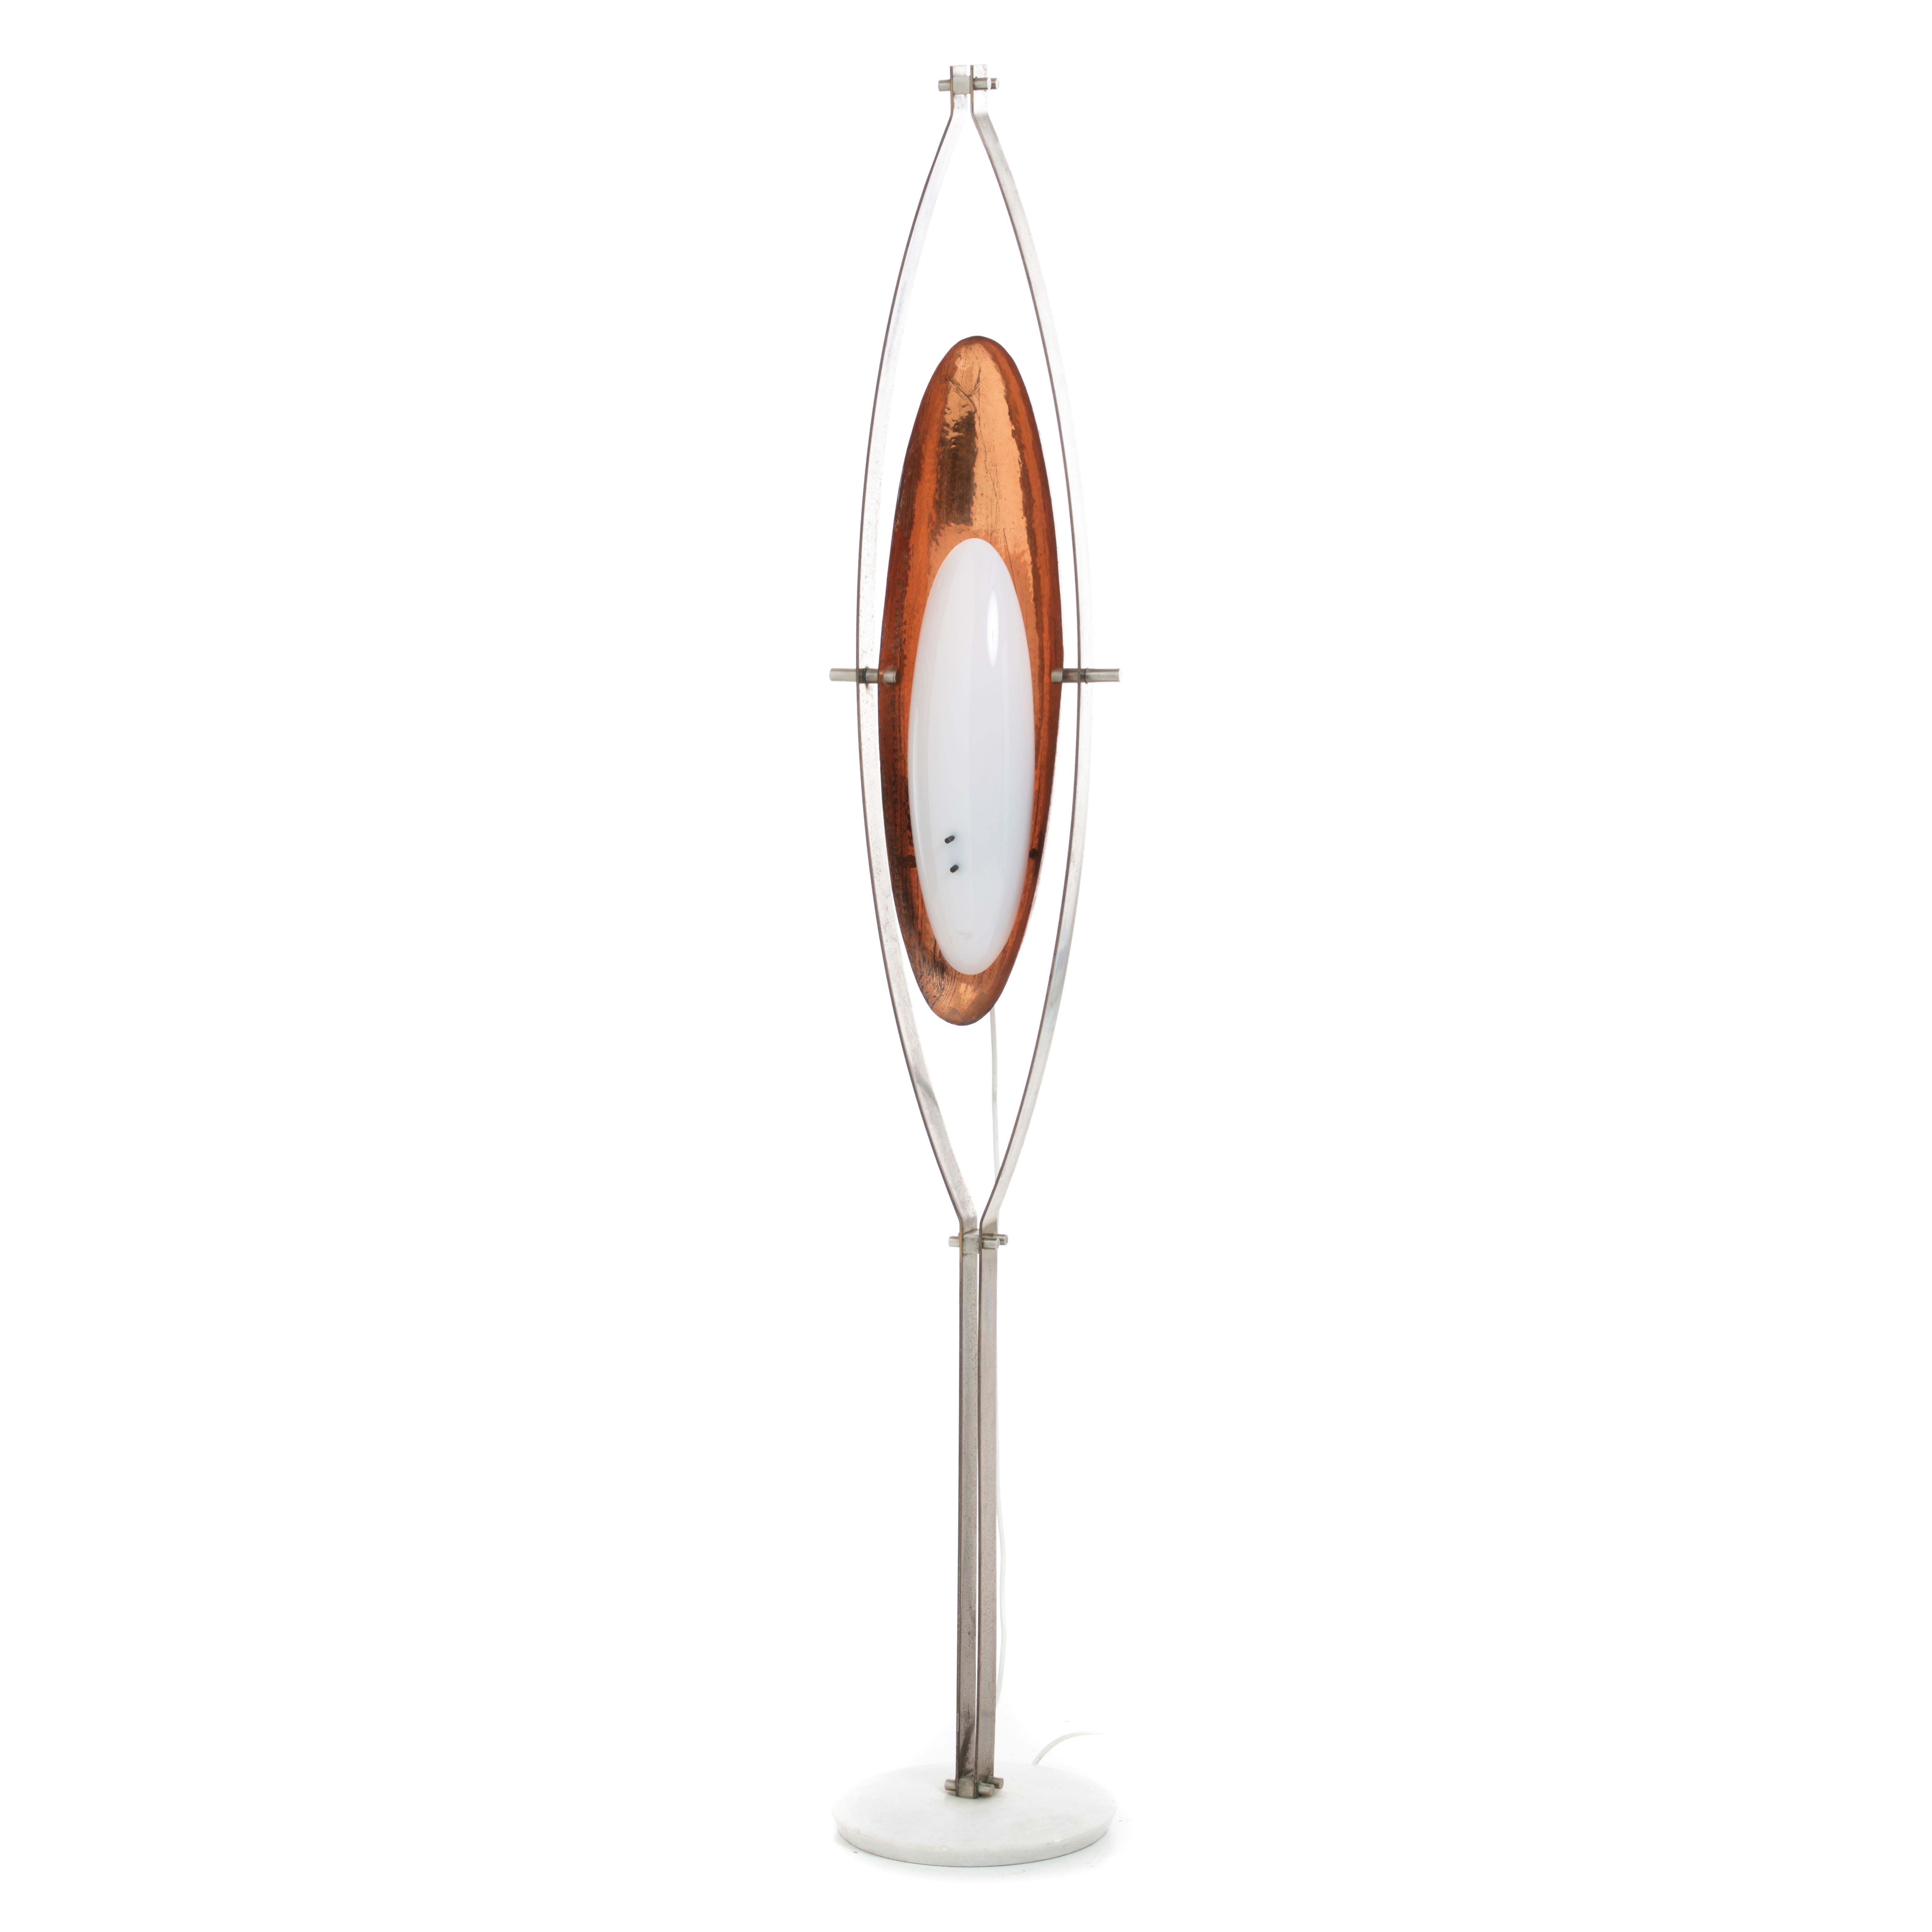 An Italian sculptural floor lamp, c.1960, made of chromed metal frame, leaf shaped hammered copper and plexiglass shade, marble base. Fitted for electricity, european plus.